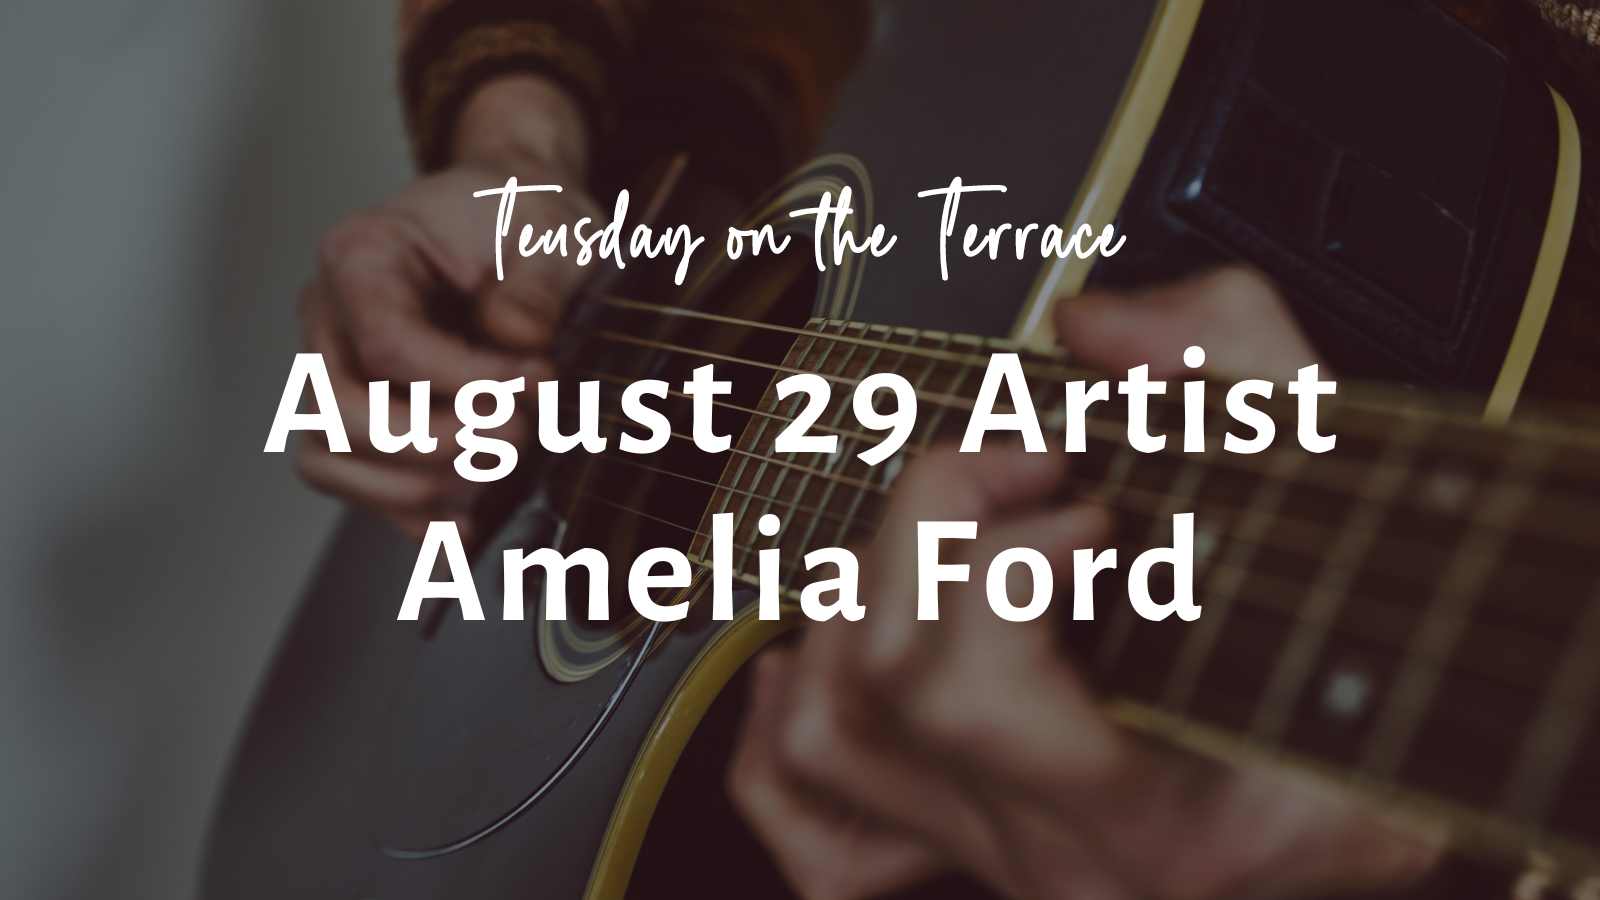 Tuesday on the Terrace artist Amelia Ford